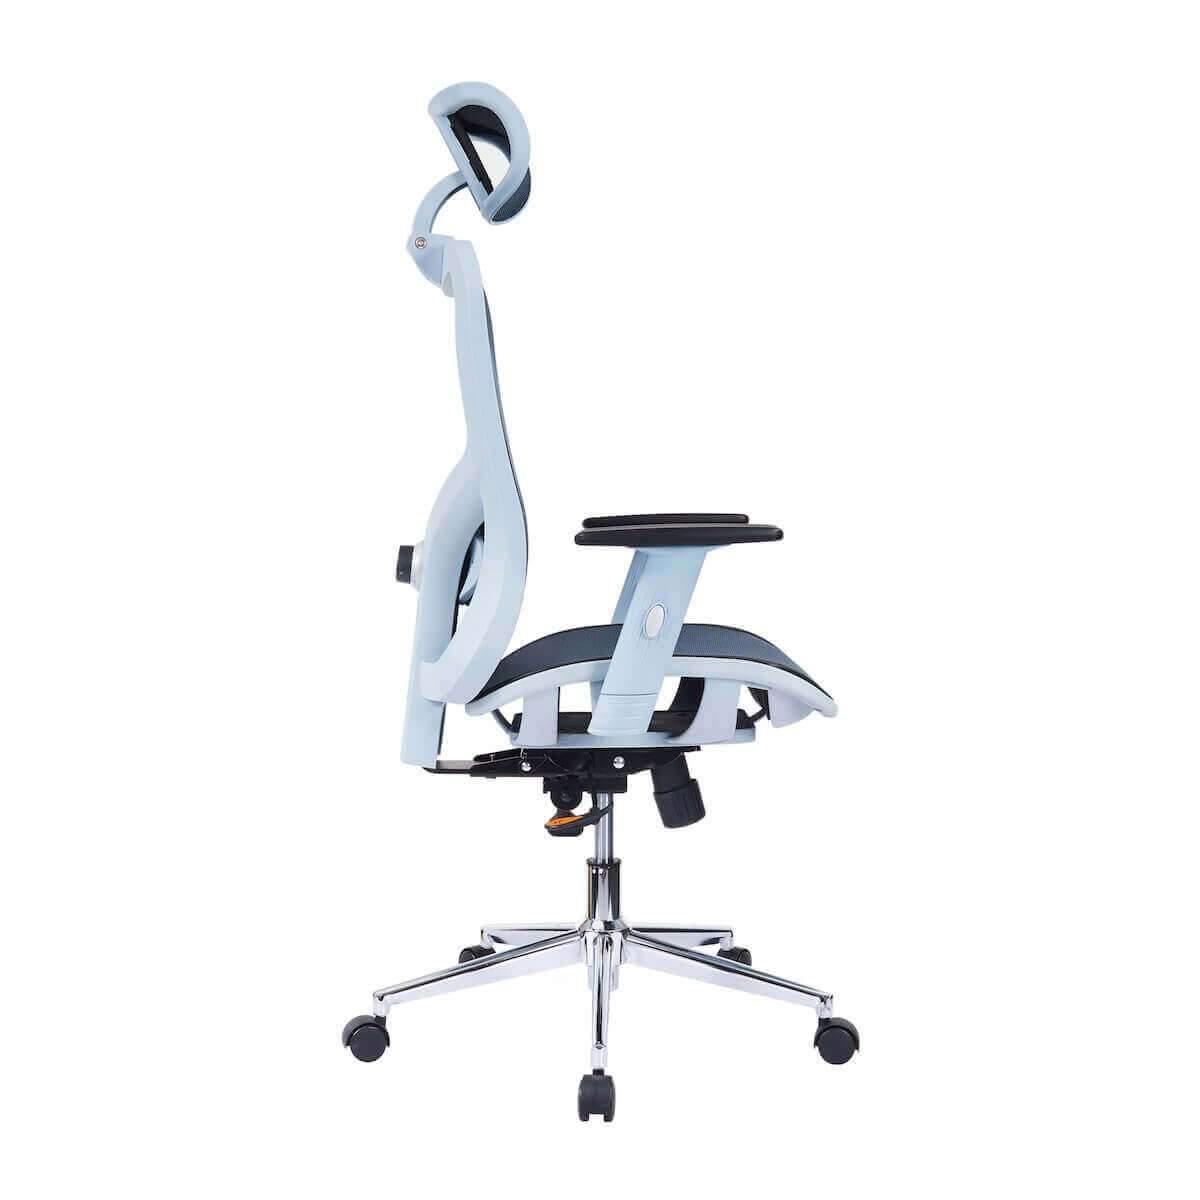 Techni Mobili Blue High Back Executive Mesh Office Chair with Arms, Headrest, and Lumbar Support RTA-1008-BL Side